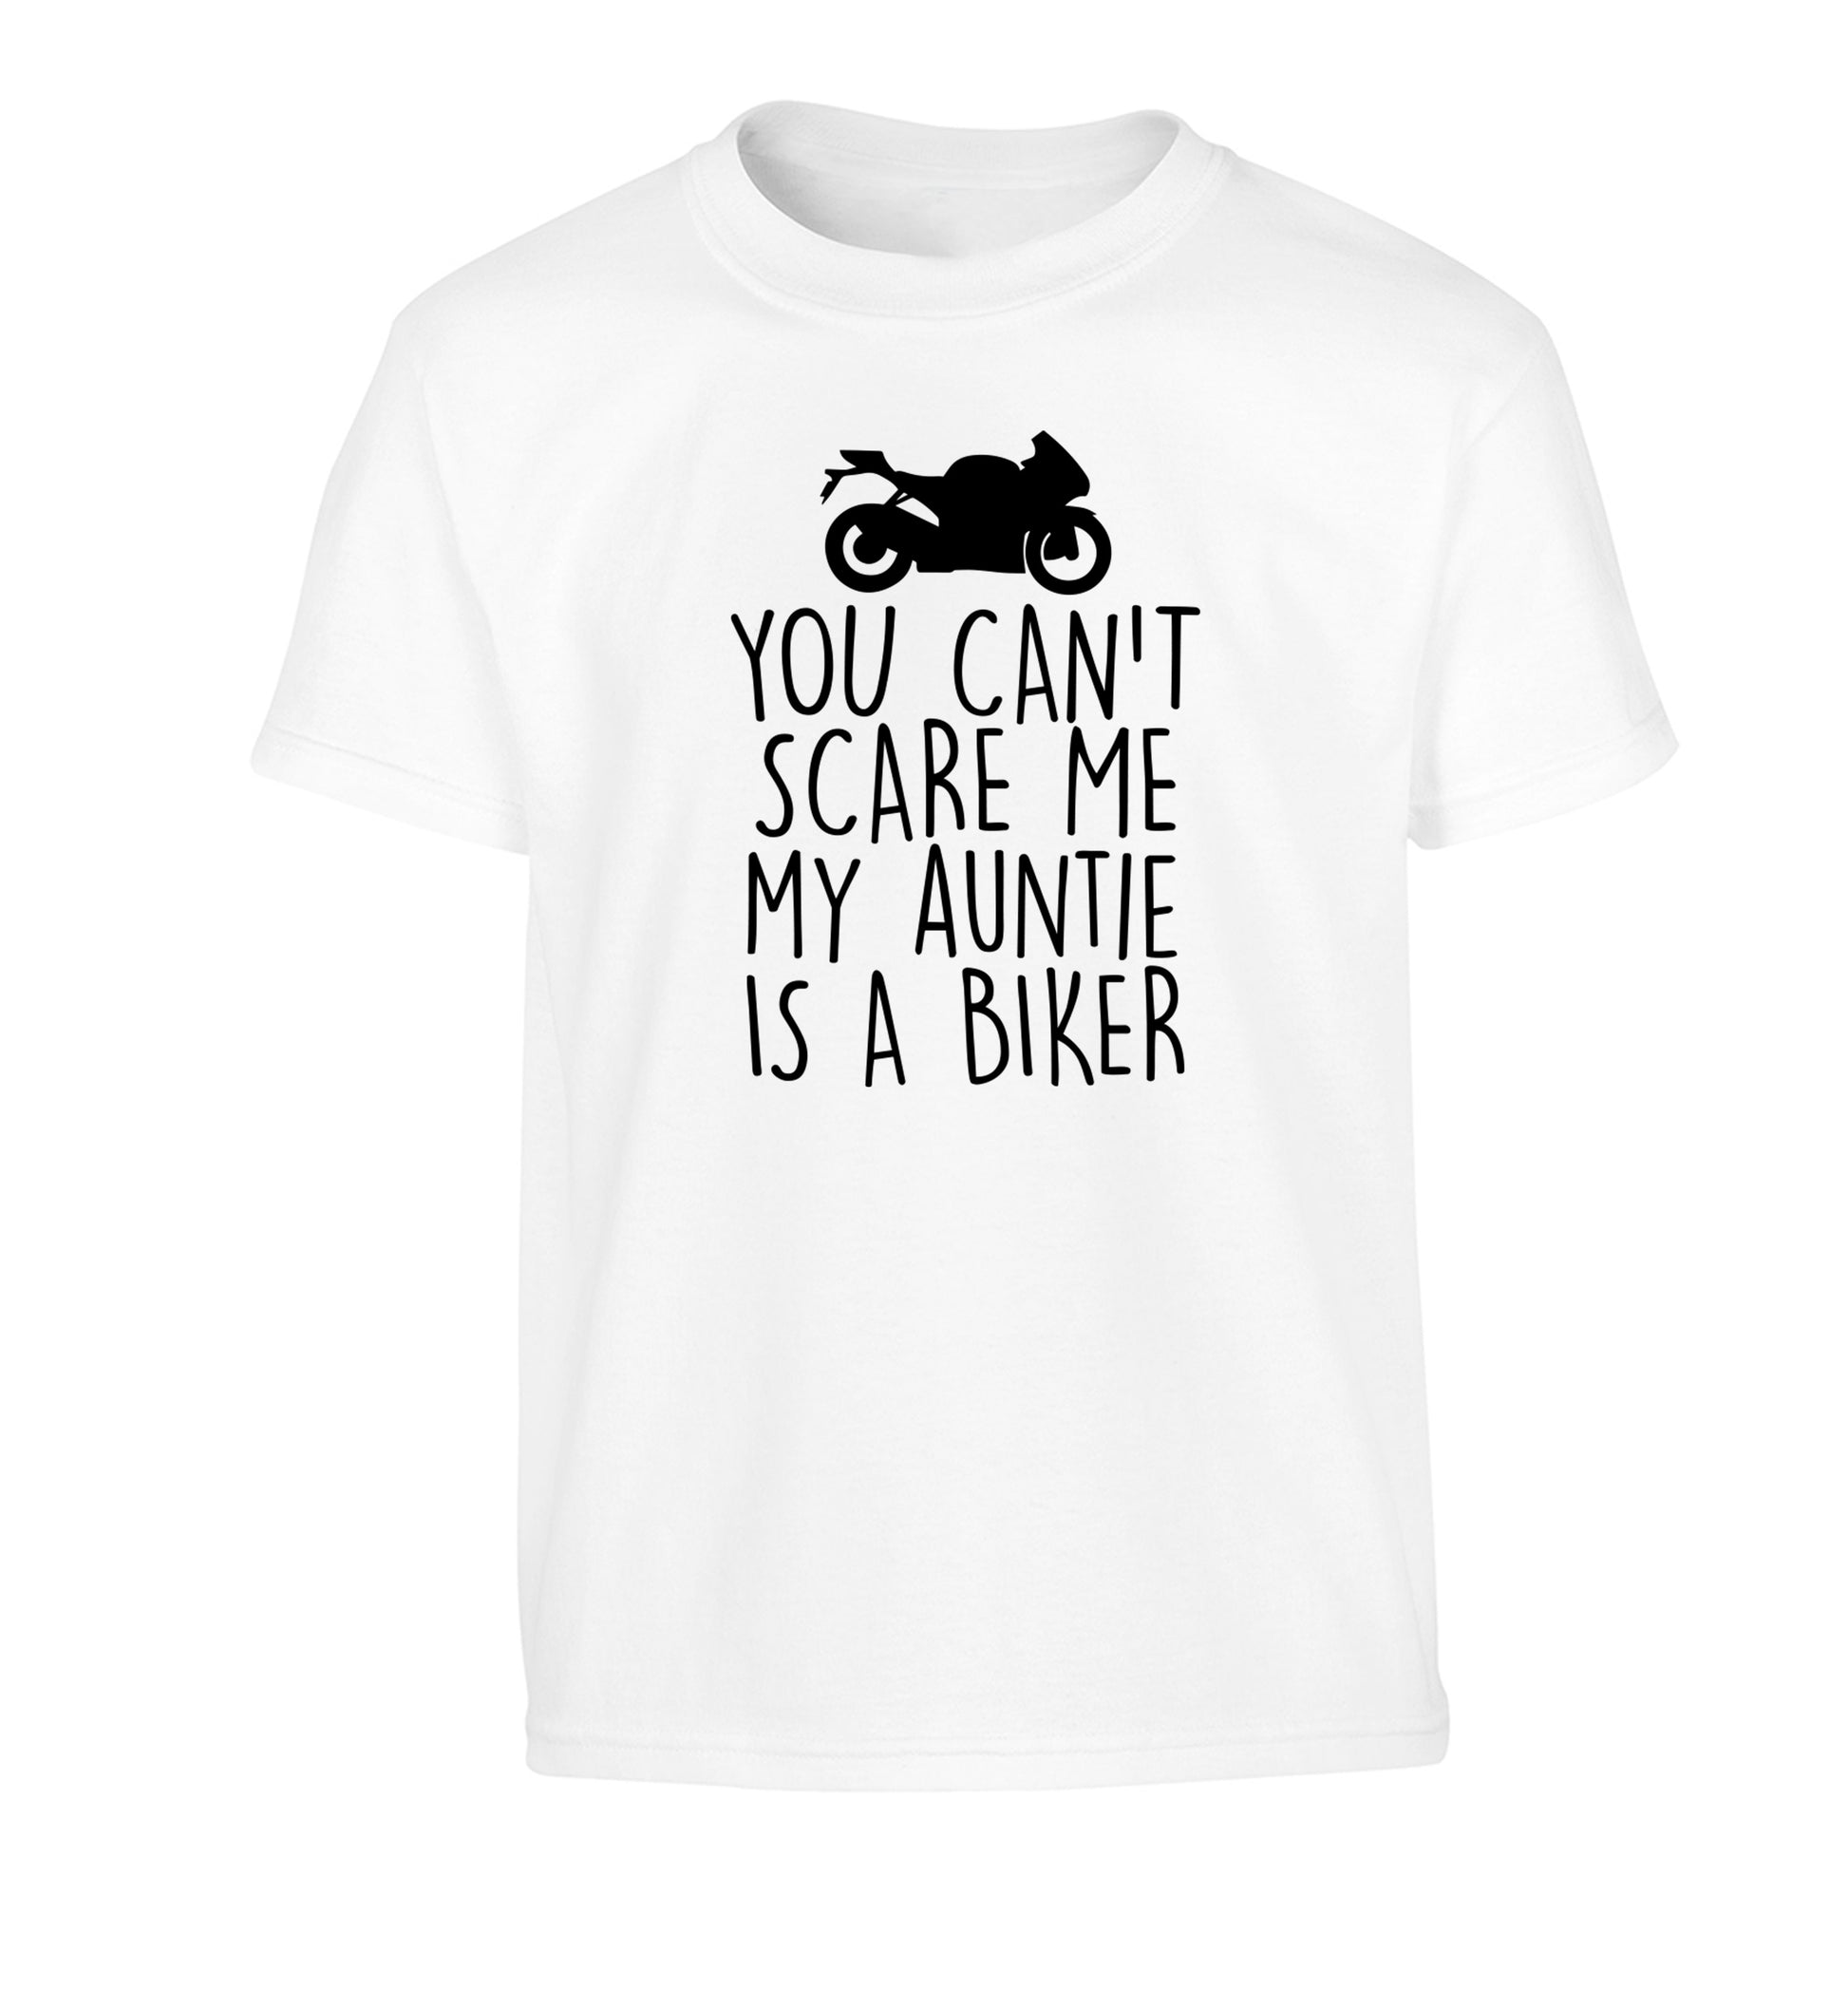 You can't scare me my auntie is a biker Children's white Tshirt 12-13 Years